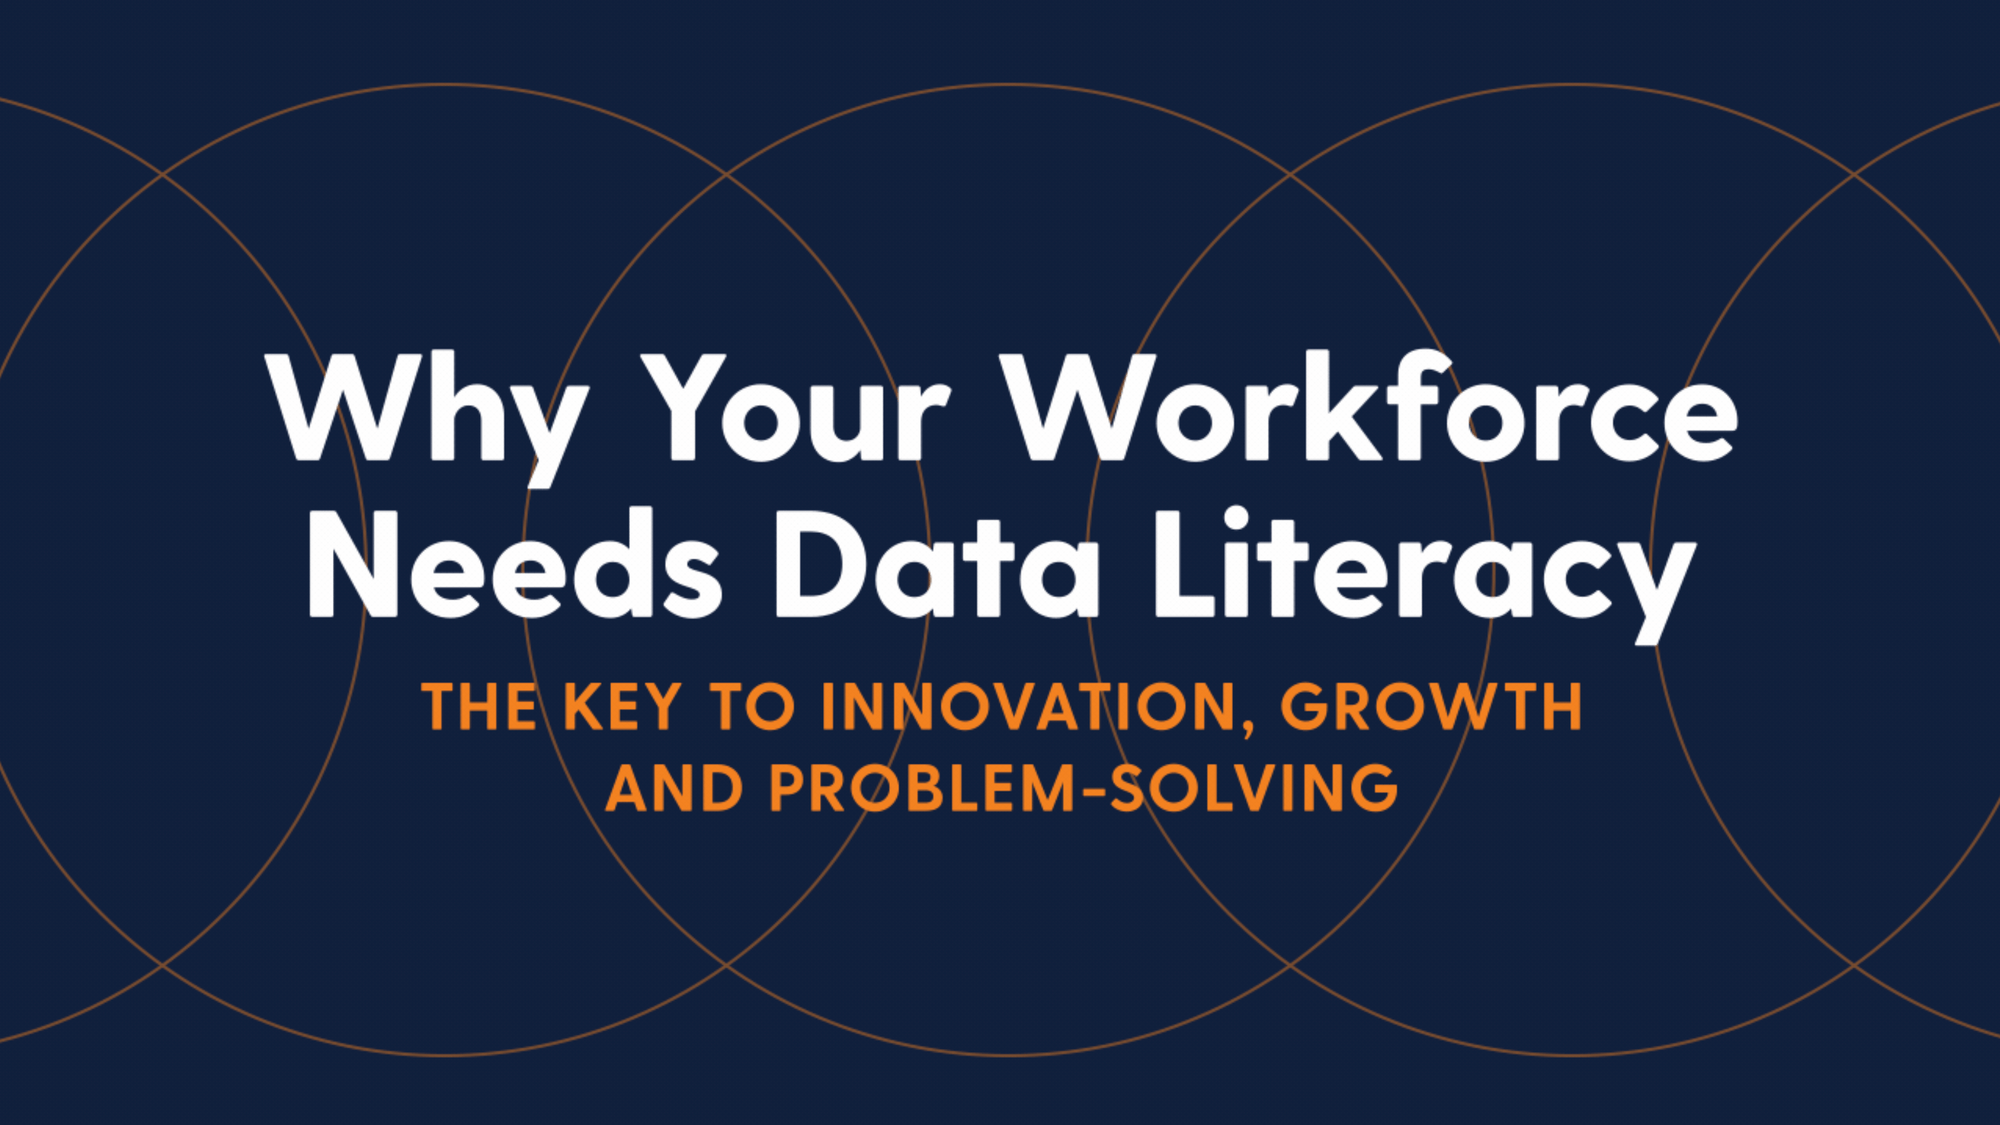 Forbes and Tableau explains Why Your Workforce Needs Data Literacy